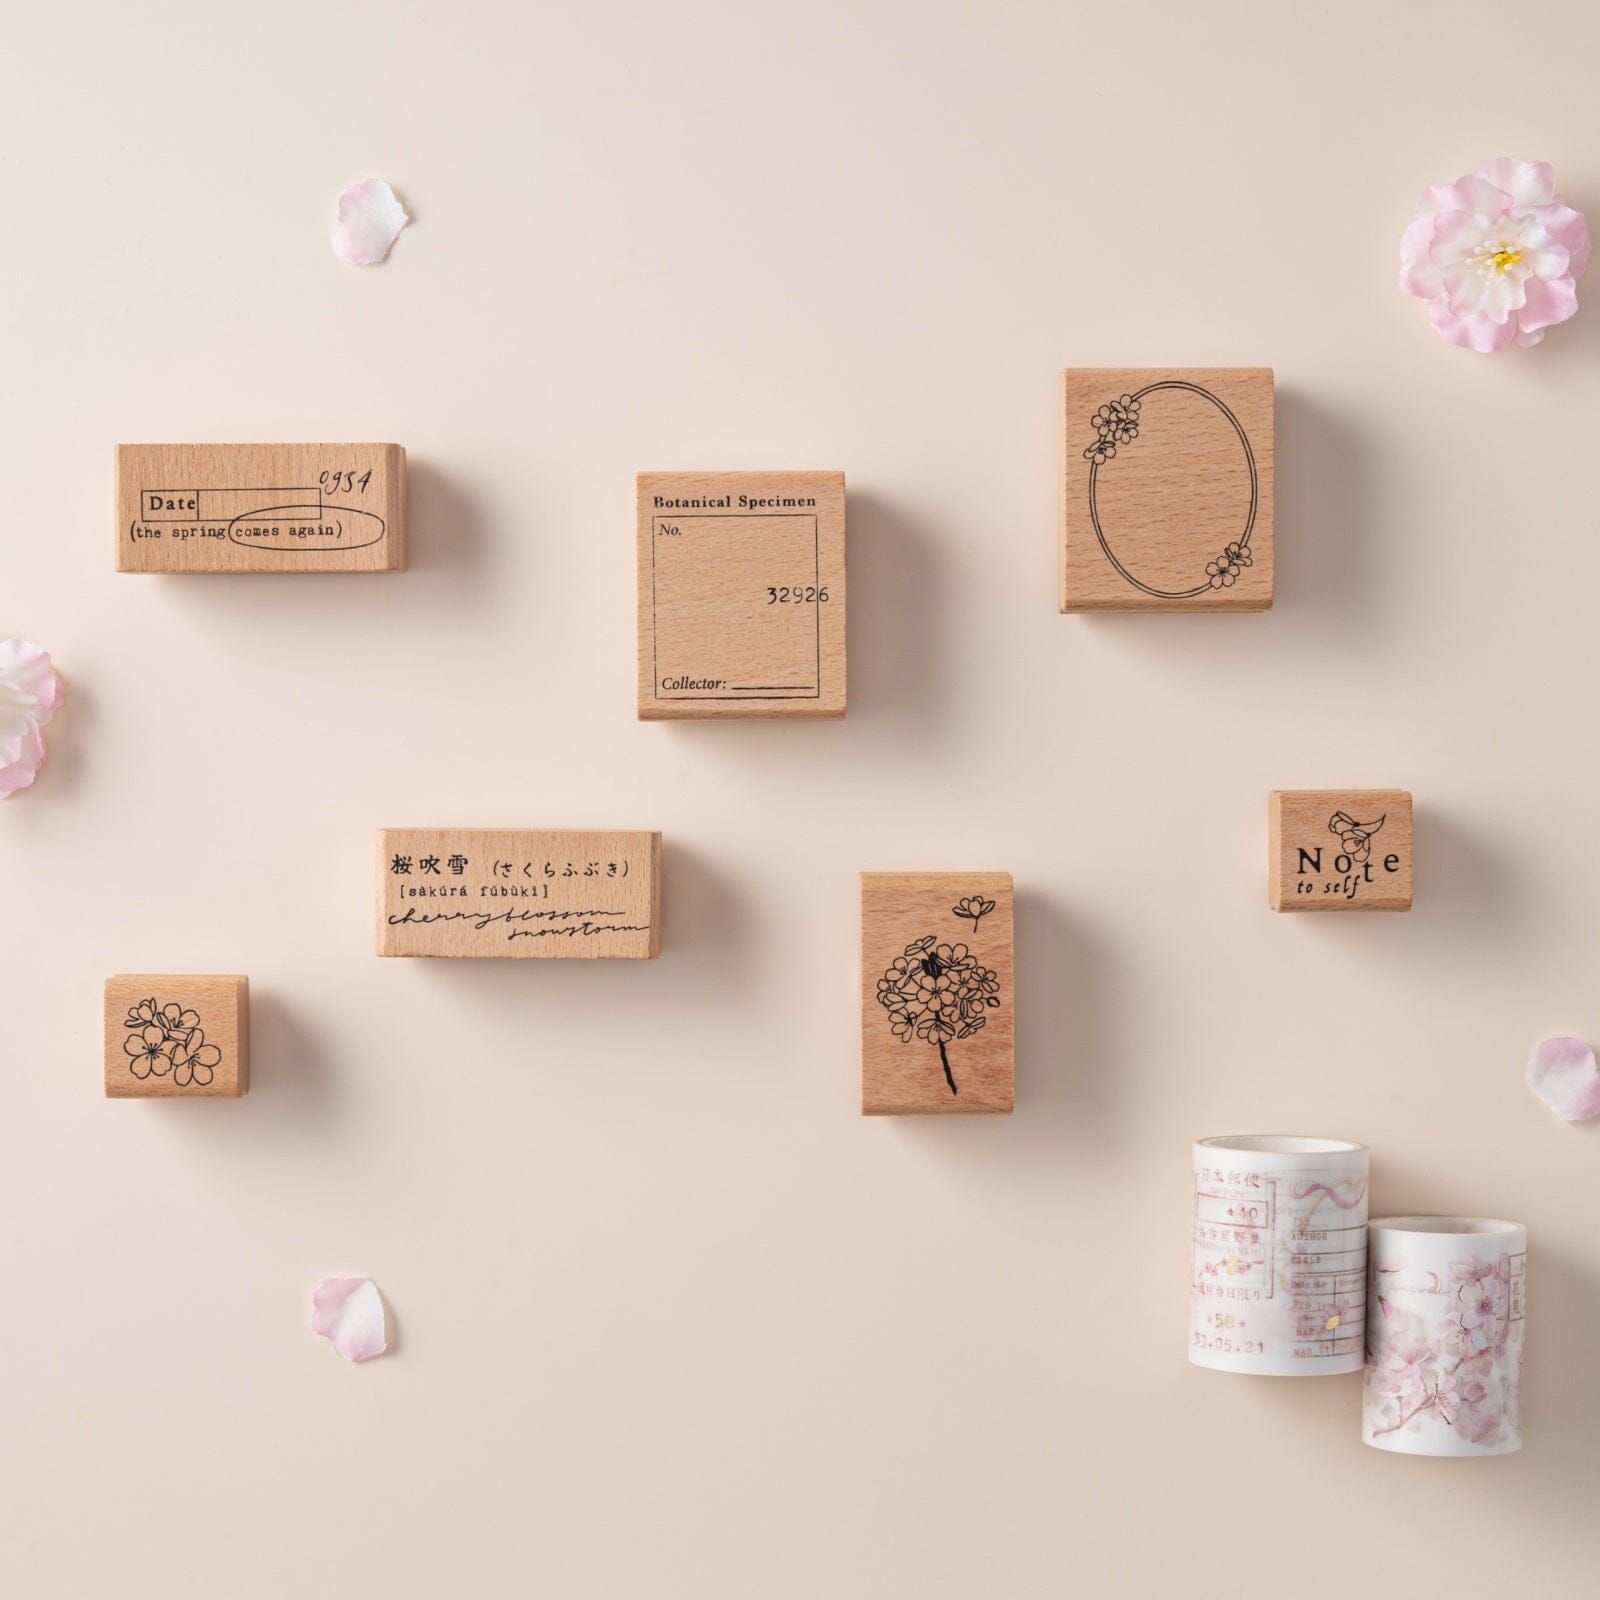 Hinoki - ‘Into the Blossom’ Wooden Stamps Set